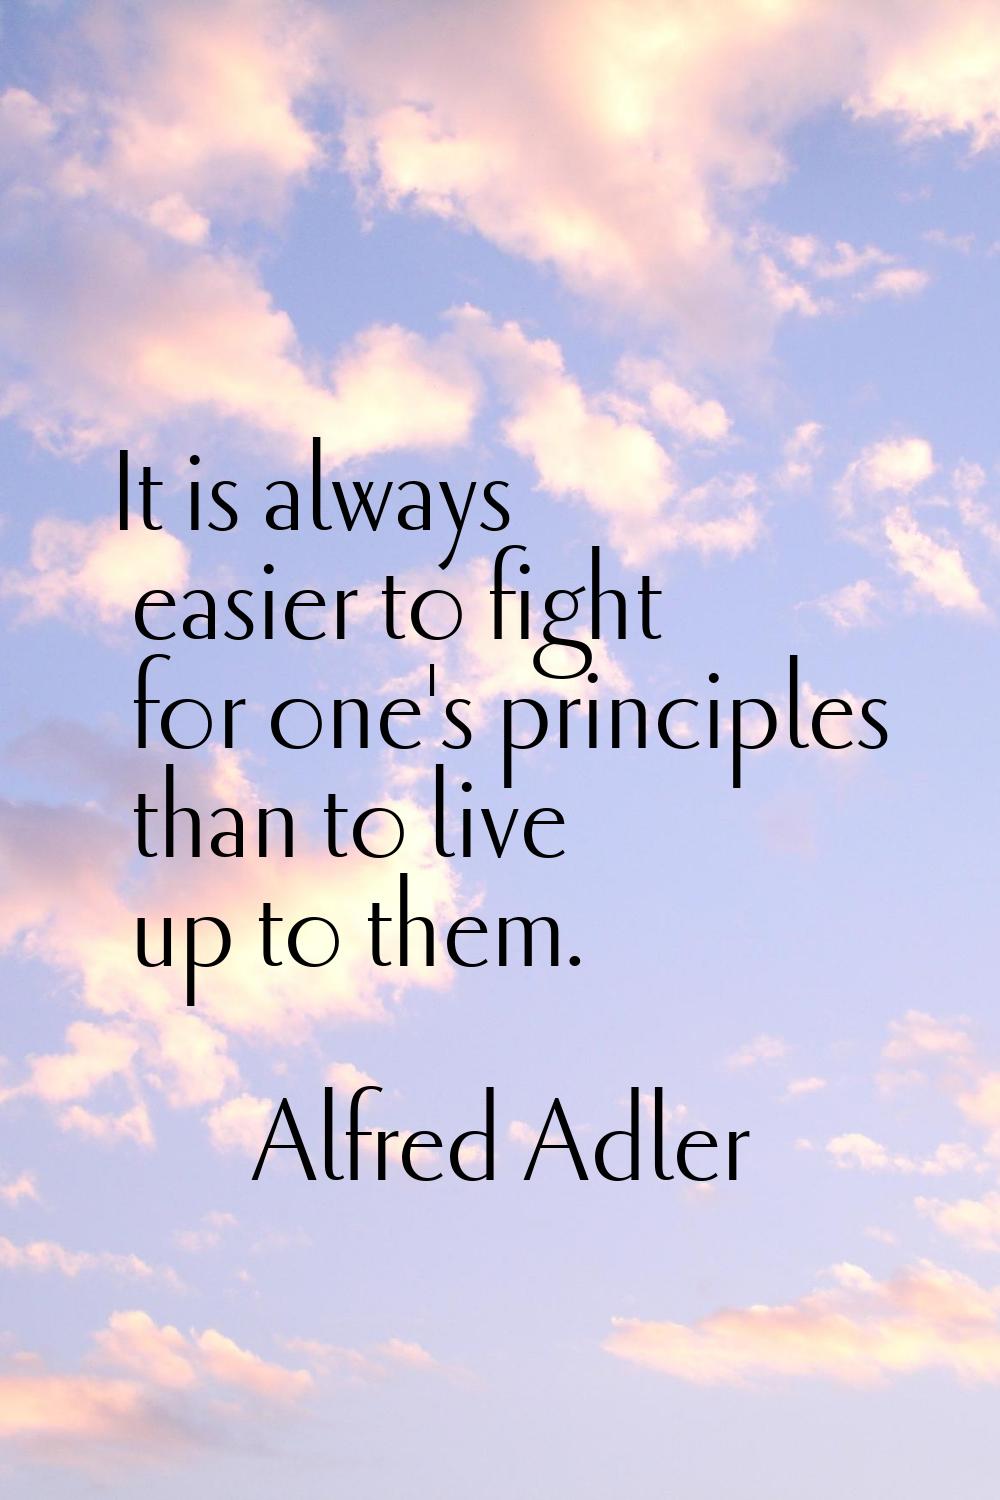 It is always easier to fight for one's principles than to live up to them.